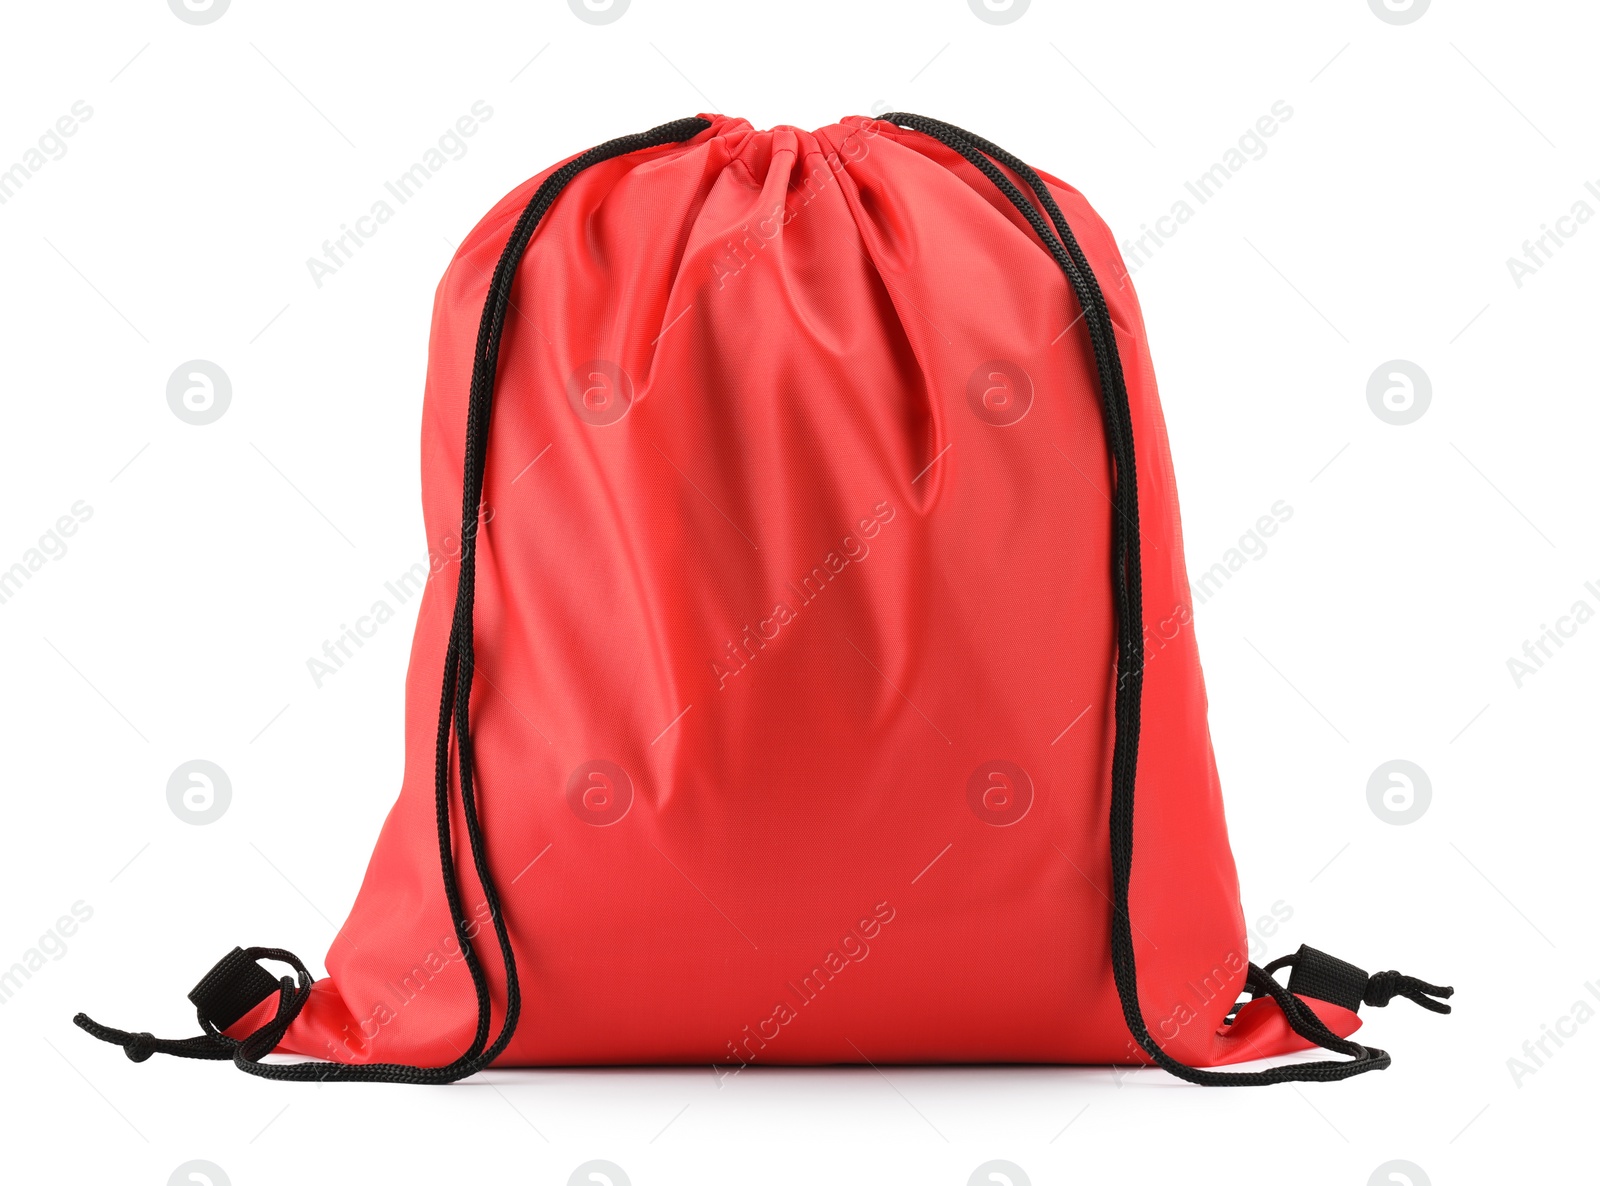 Photo of One red drawstring bag isolated on white